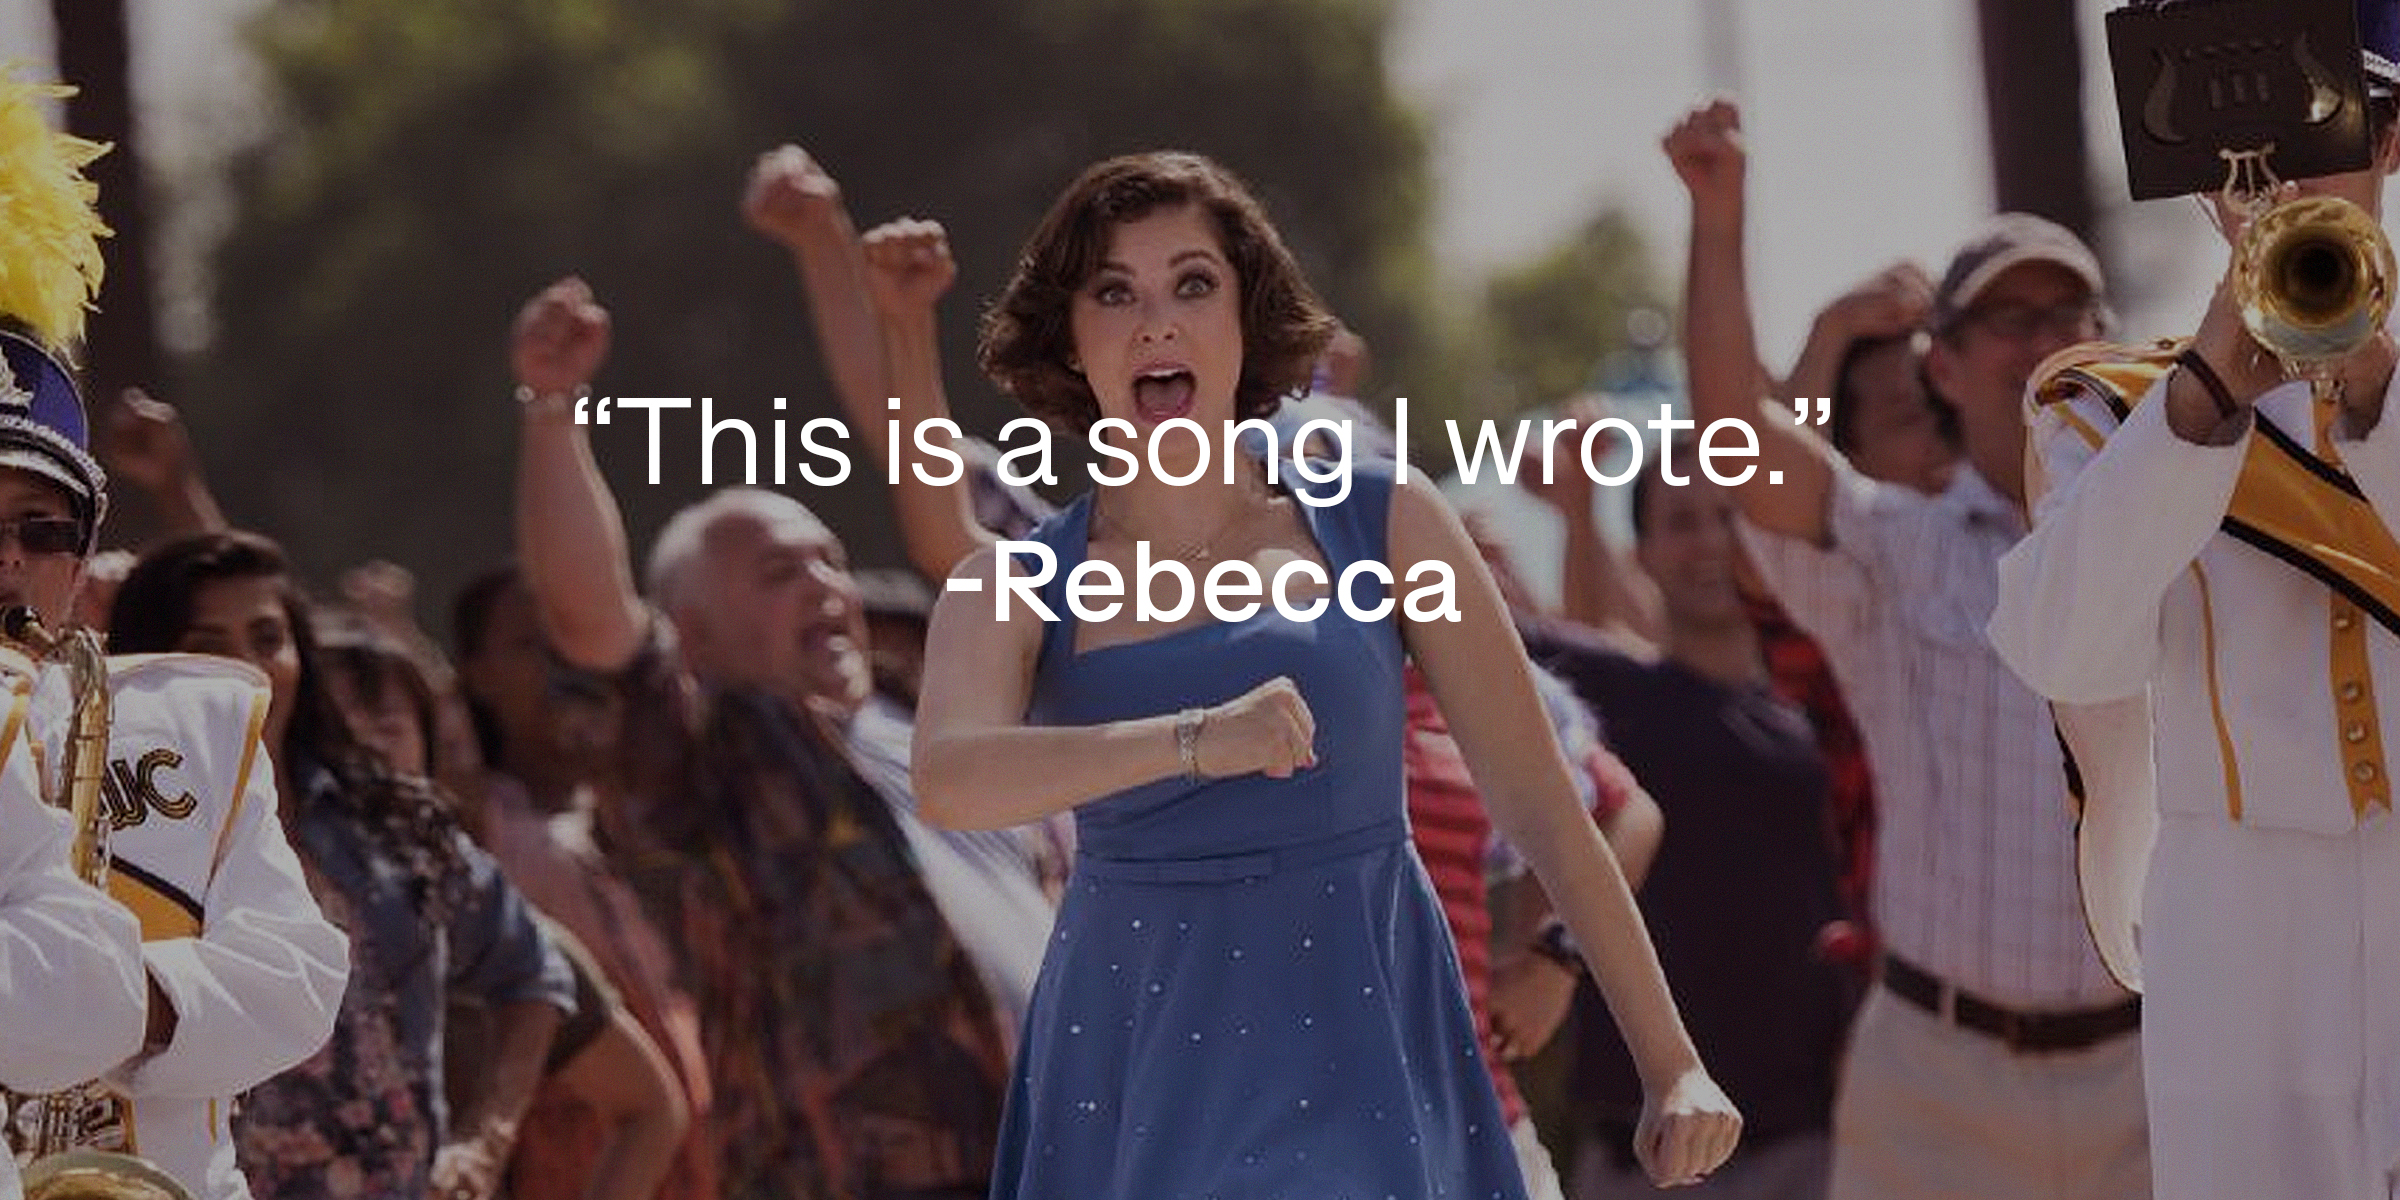 Rebecca singing, with her quote: “This is a song I wrote.” | Source: facebook.com/crazyxgf